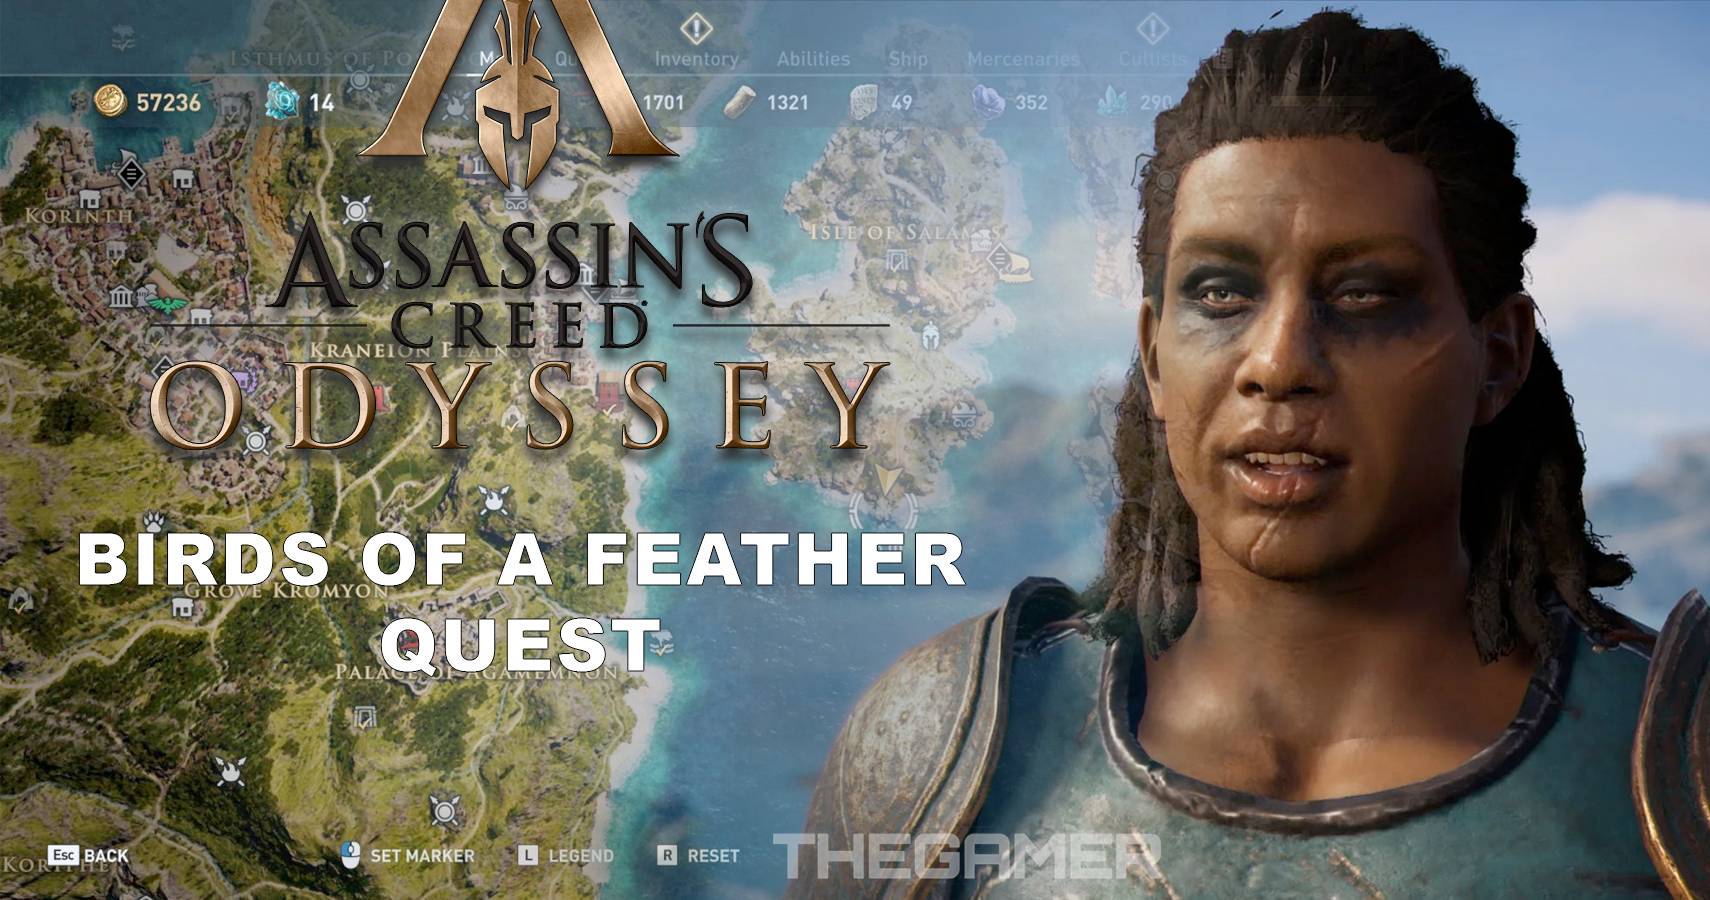 Assassins creed odyssey birds of a feather